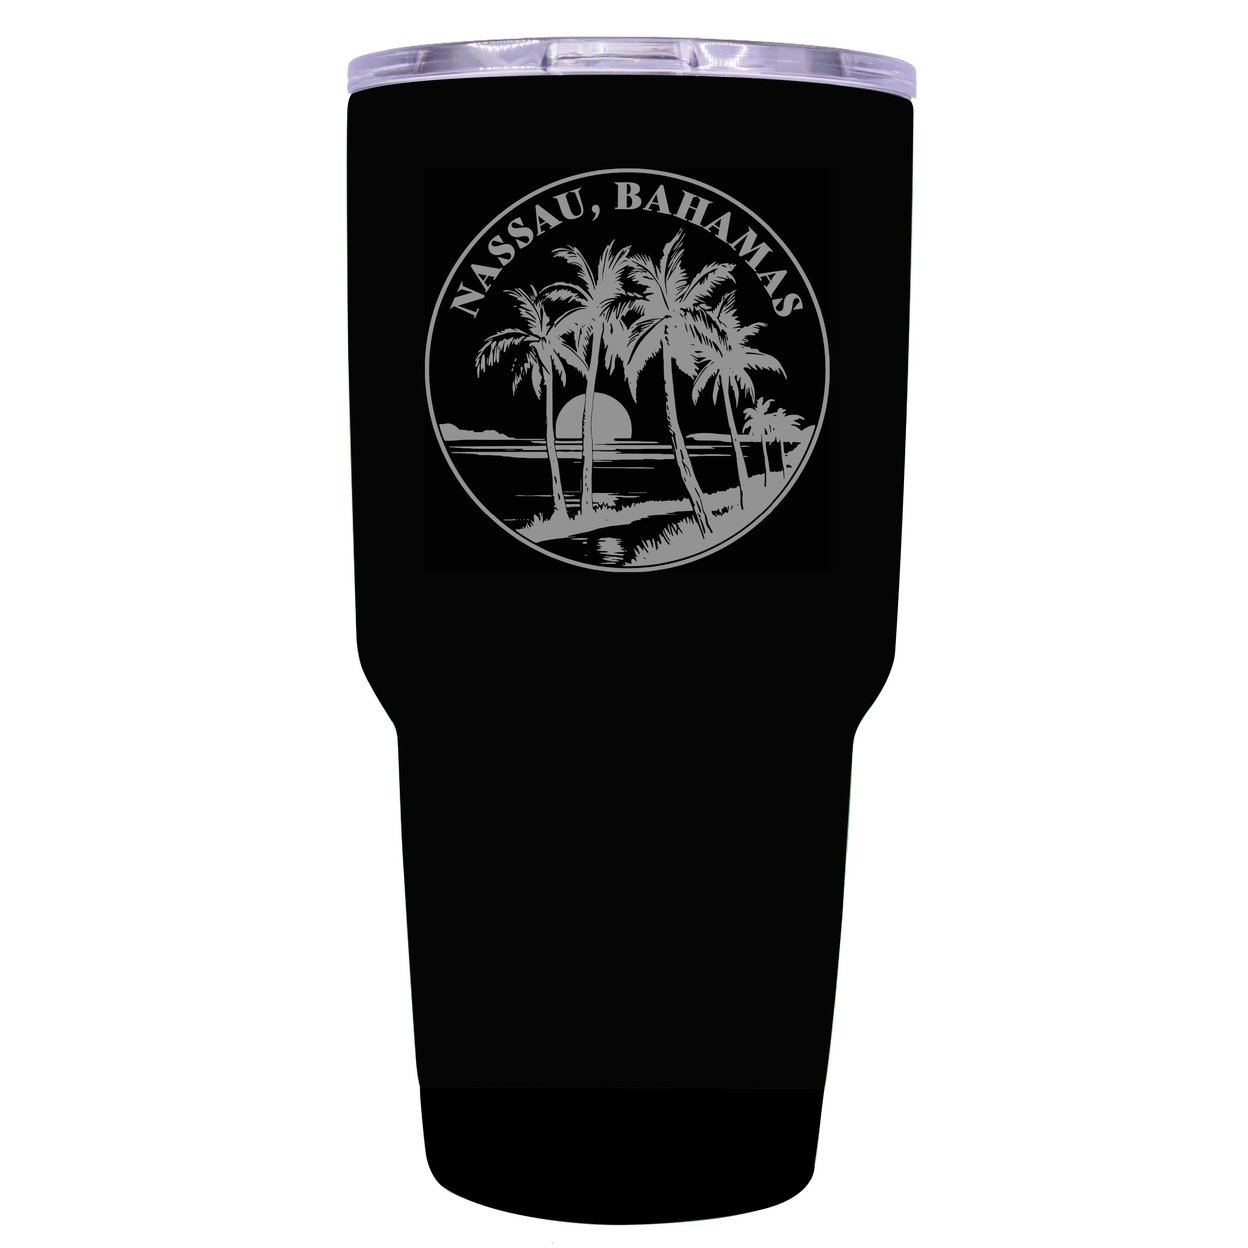 Nassau The Bahamas Souvenir 24 Oz Engraved Insulated Stainless Steel Tumbler - Black,,2-Pack